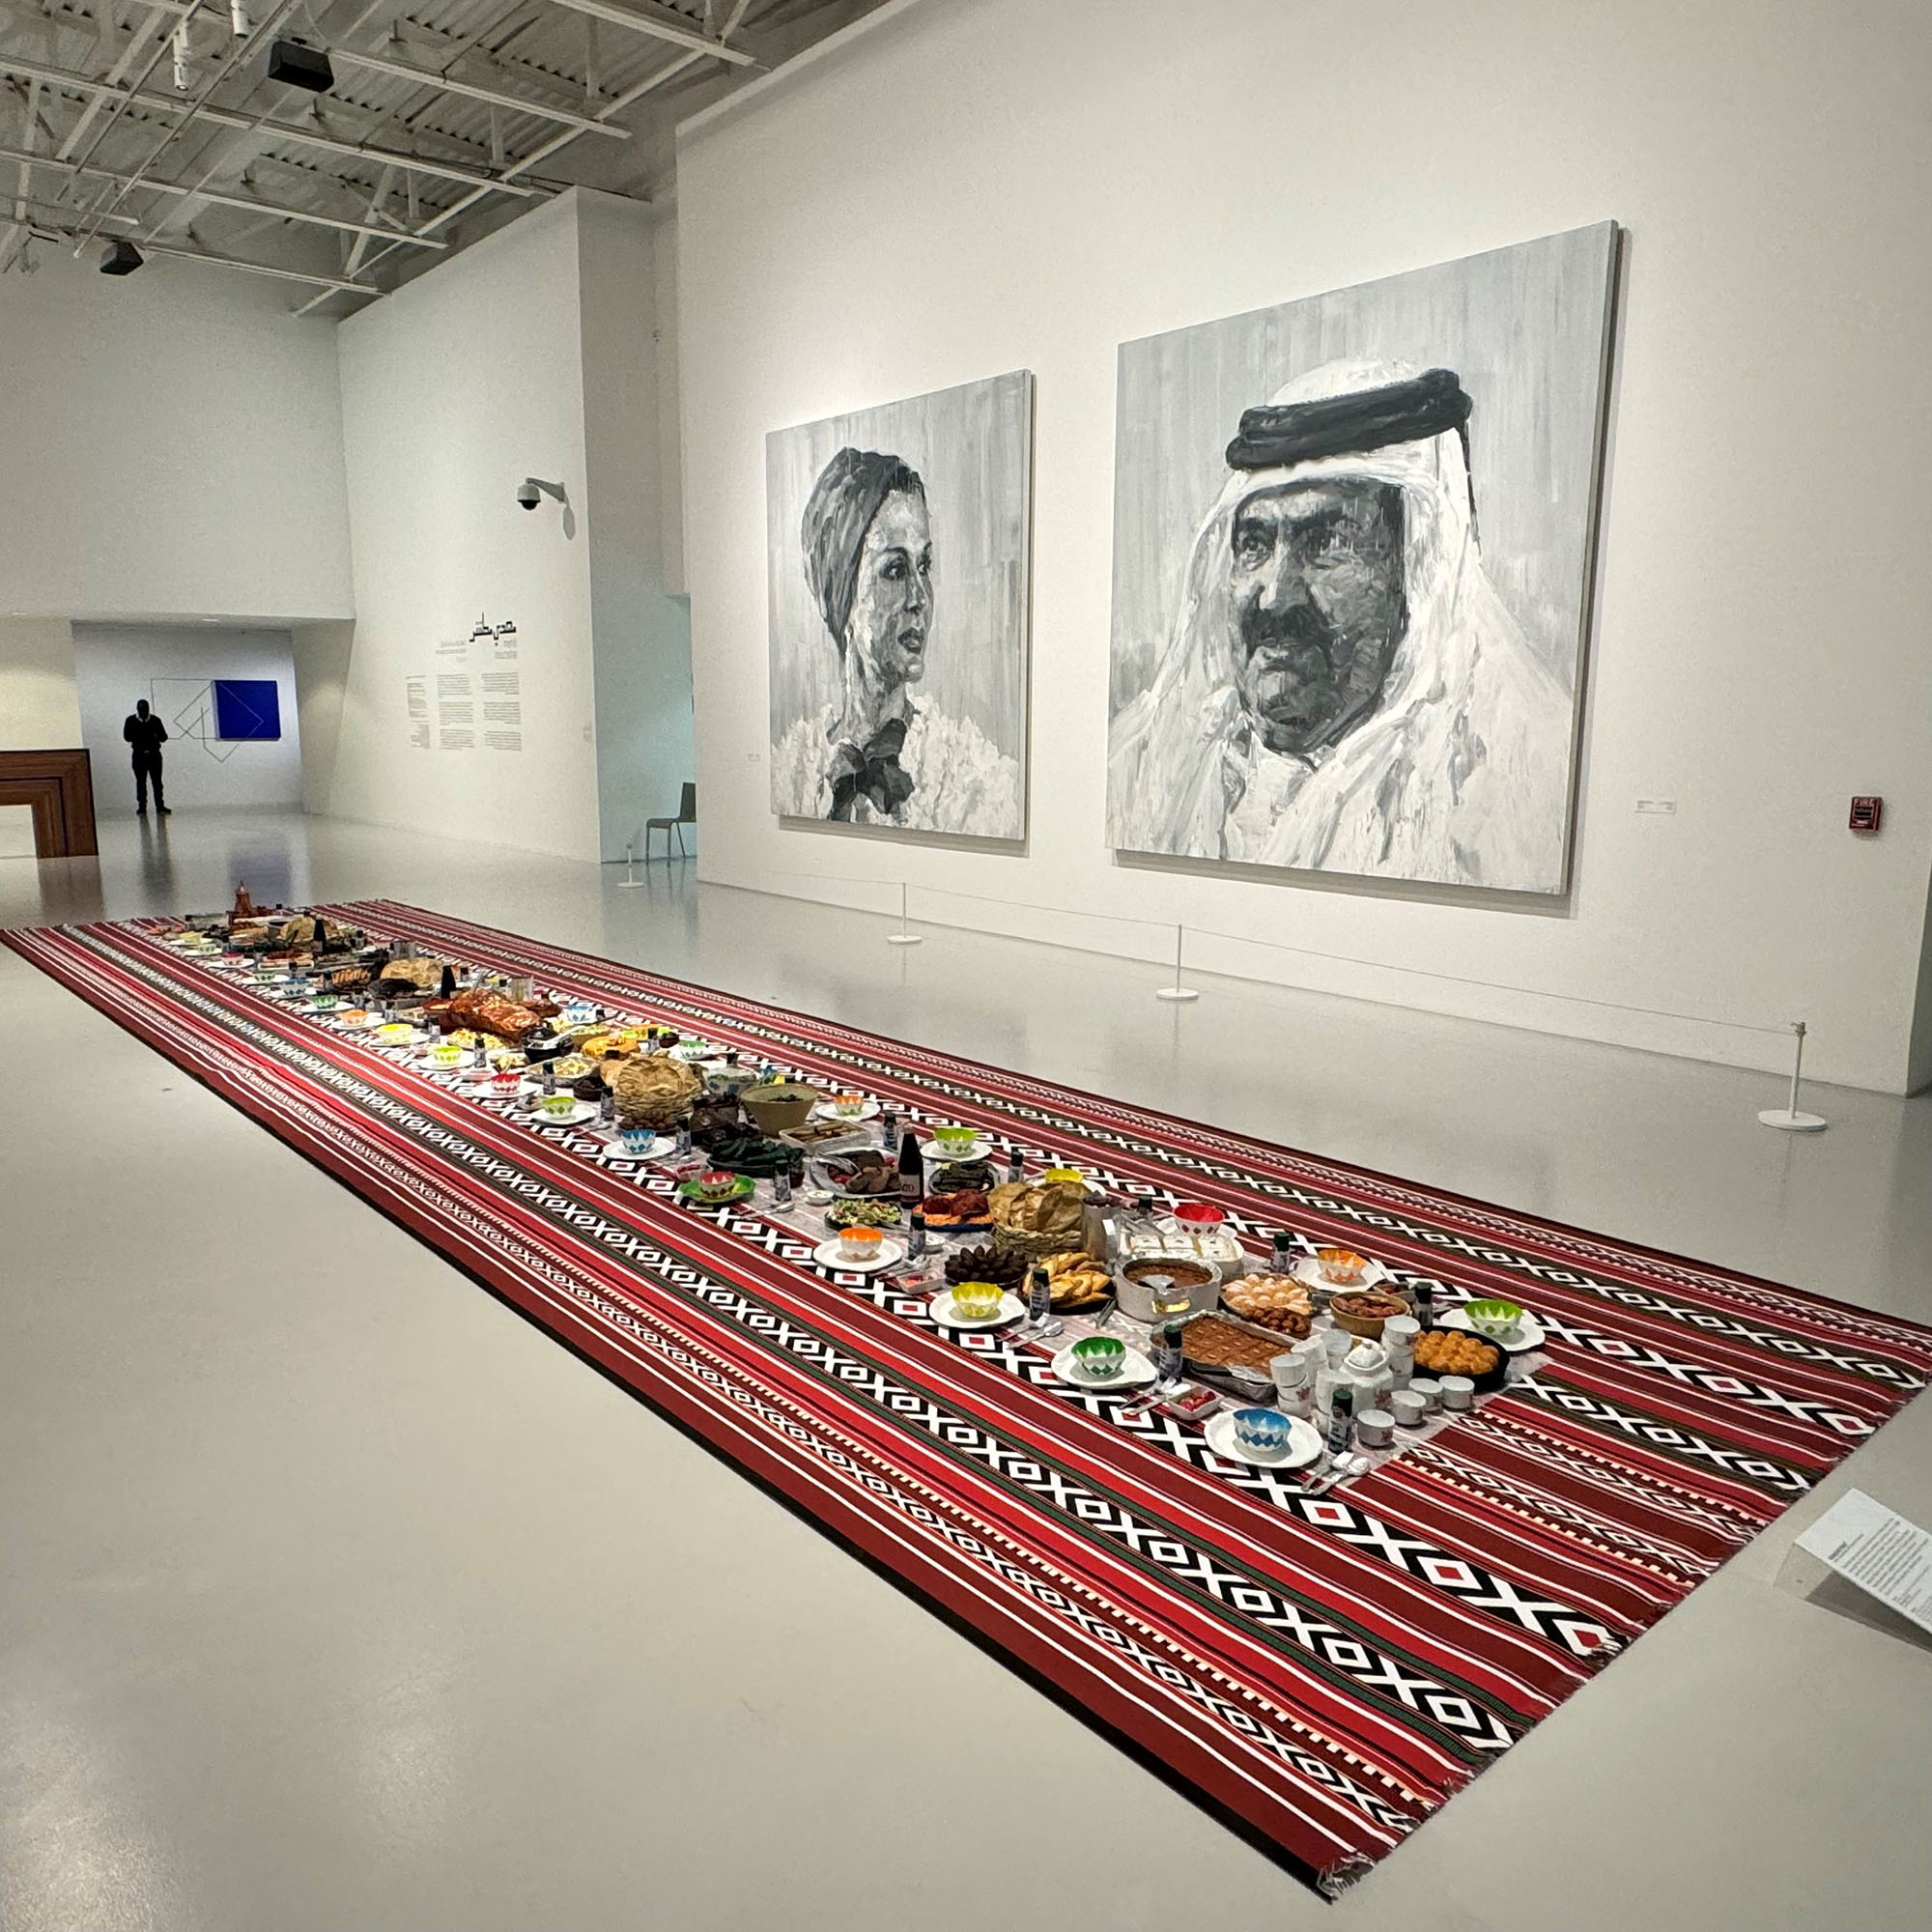 The Ramadan Feast work on display at Mathaf . In the background there are two paintings . One is of His Highness The Father Amir Sheikh Hamad bin Khalifa Al Thani . The other is of Her Highness Sheikha Moza bint Nasser